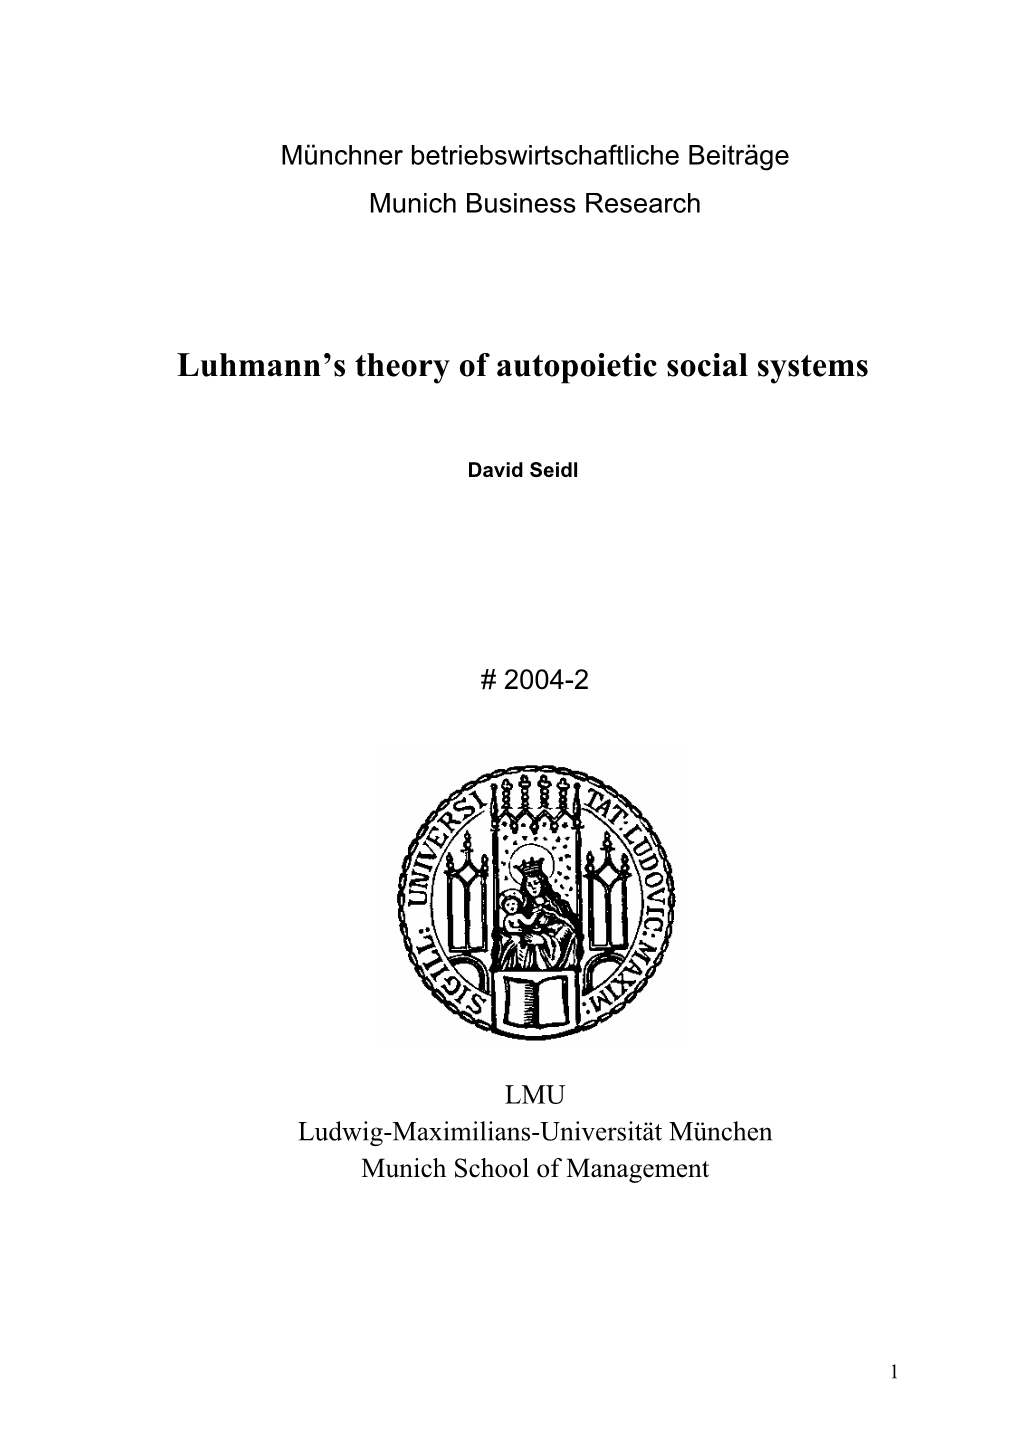 Luhmann's Theory of Autopoietic Social Systems